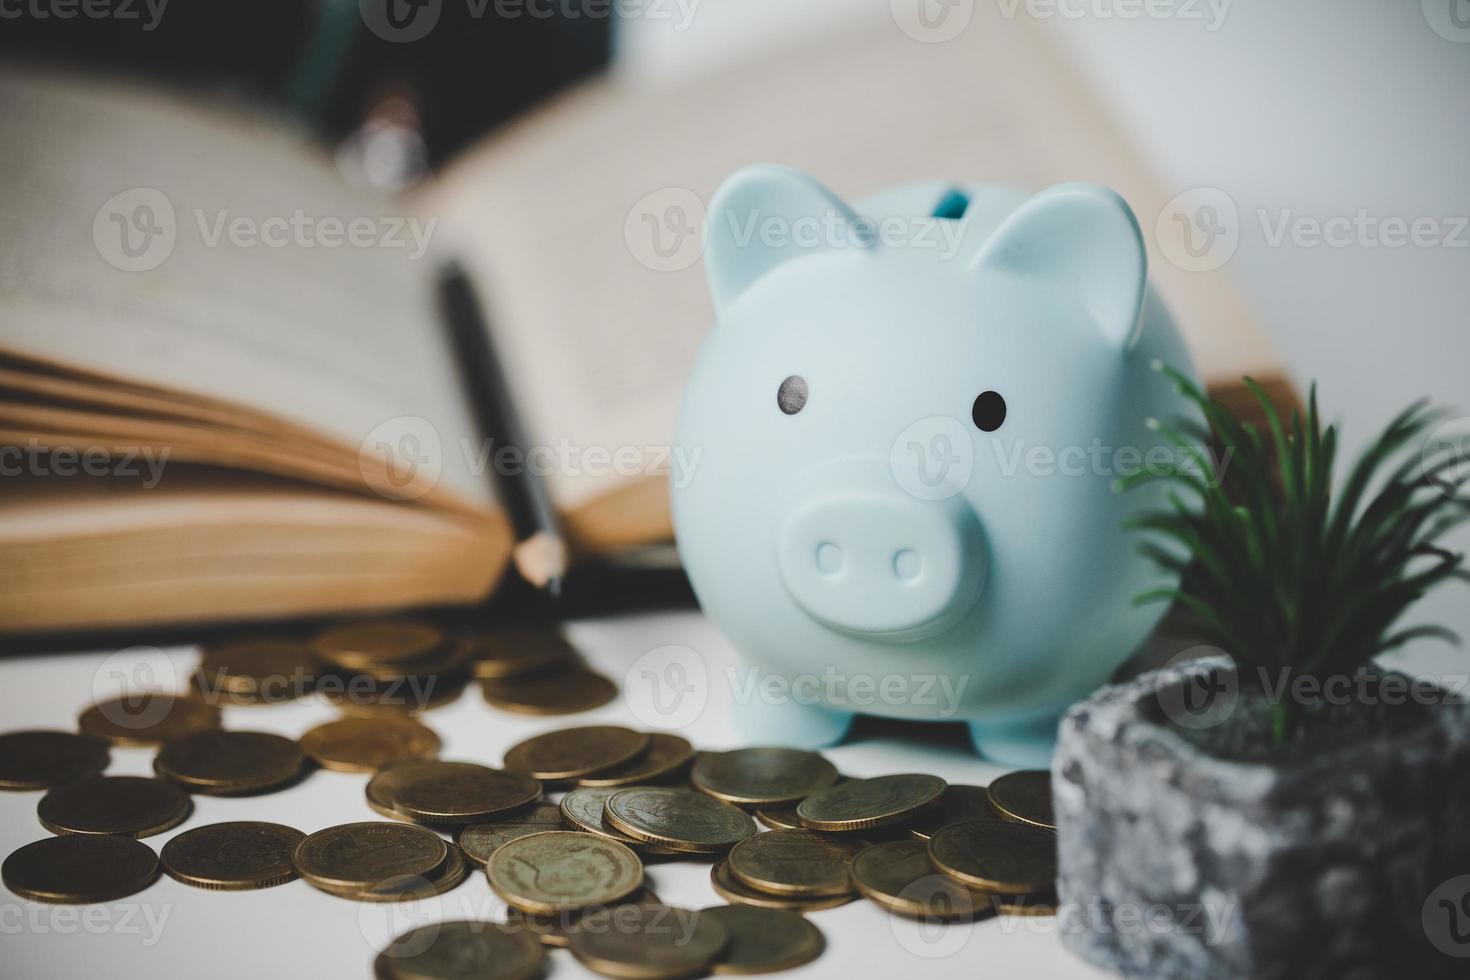 close-up education object with stack money coin-cash dollar and glass jar on background. Concept to saving money income for study, Calculating student finance costs and investment budget loan photo